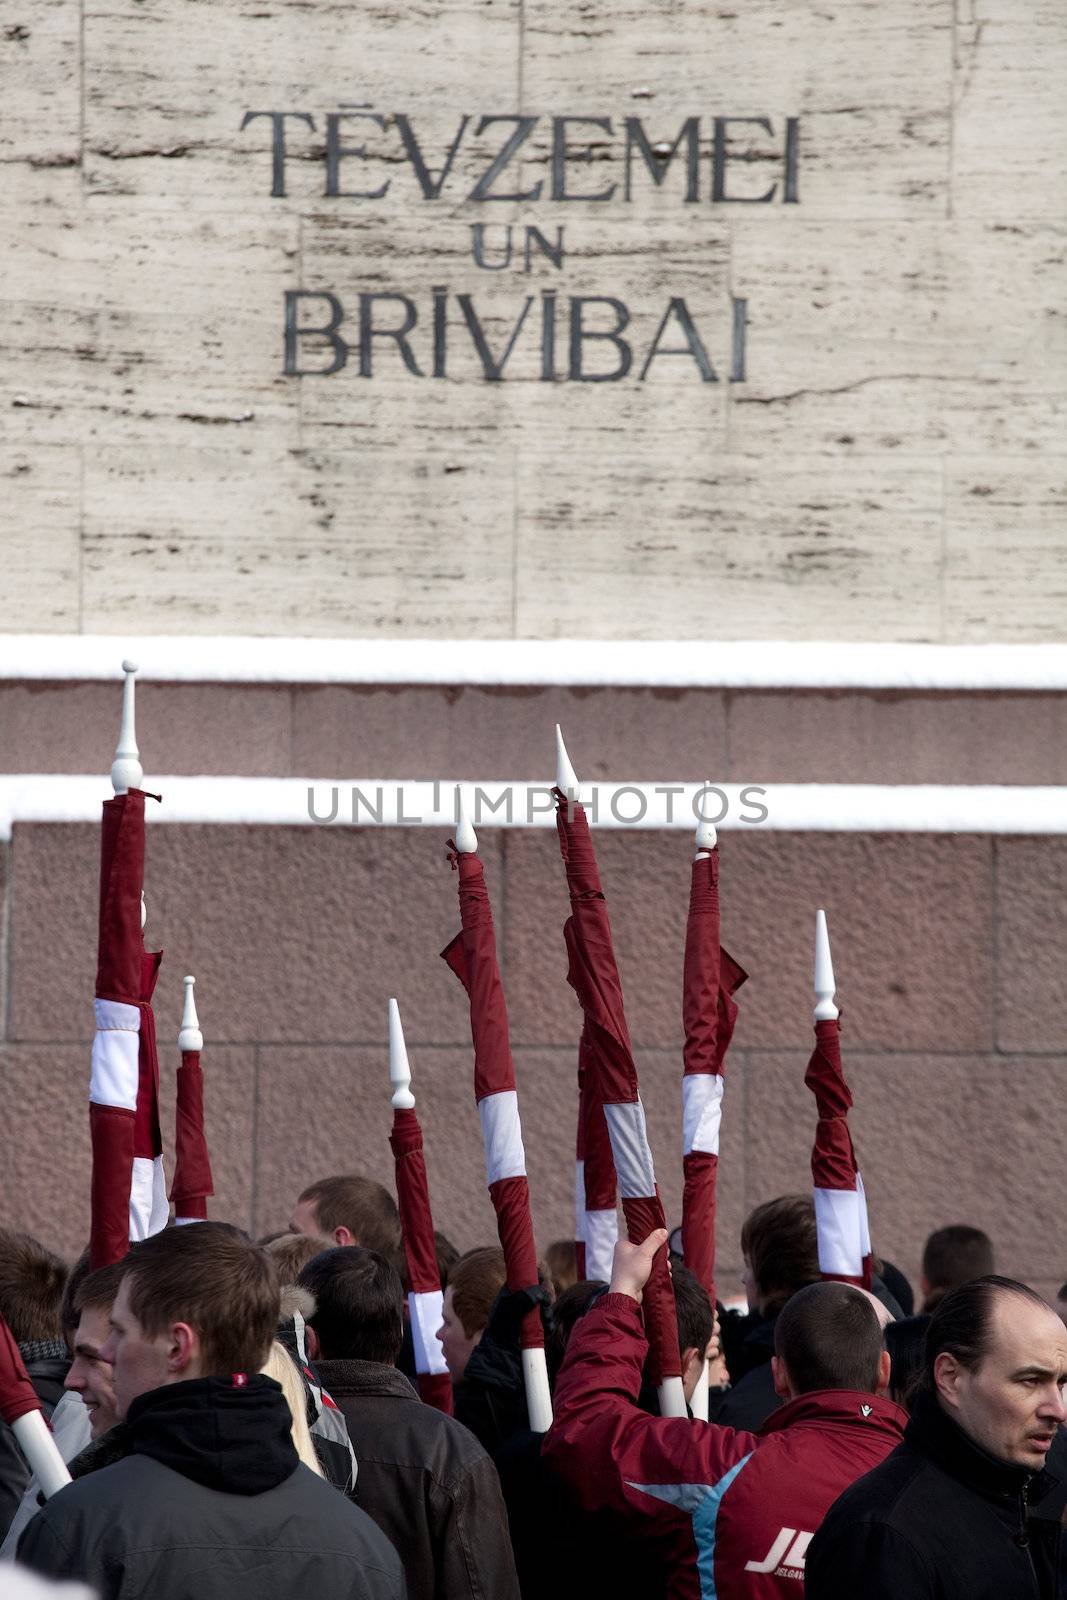 RIGA, LATVIA, MARCH 16, 2010: Latvian flags at Freedom monument. Commemoration of the Latvian Waffen SS unit or Legionnaires.The event is always drawing crowds of nationalist supporters and anti-fascist demonstrators. Many Latvians were forcibly called to join the Latvian SS Legion.